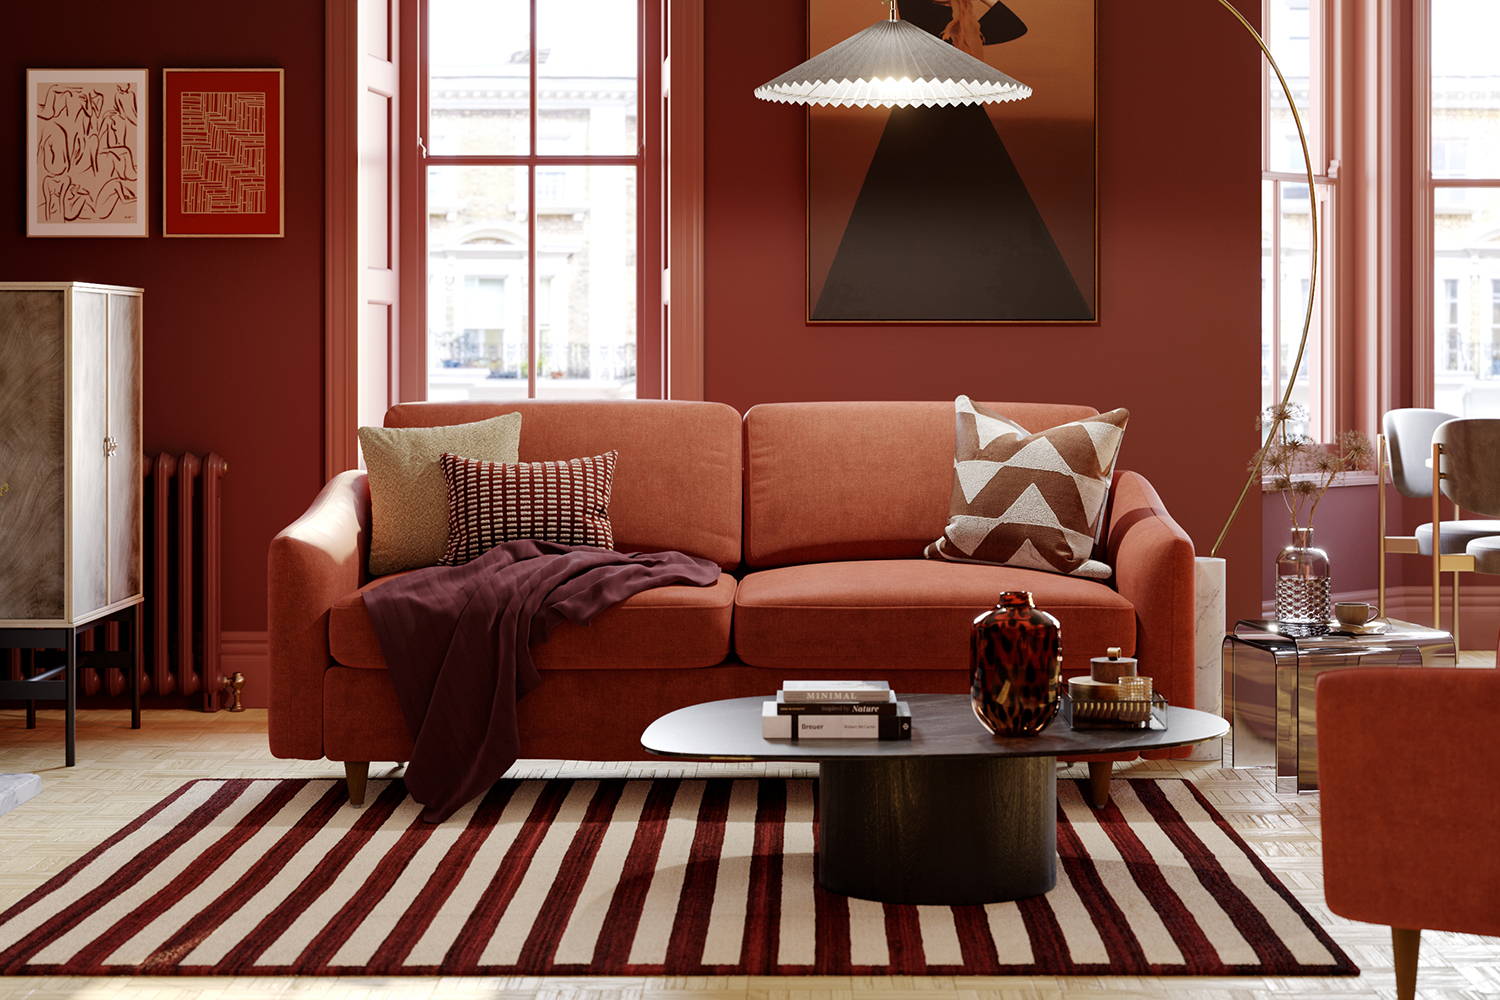 Monochromatic Spice living oom with rebel 3 seaterr sofa bed